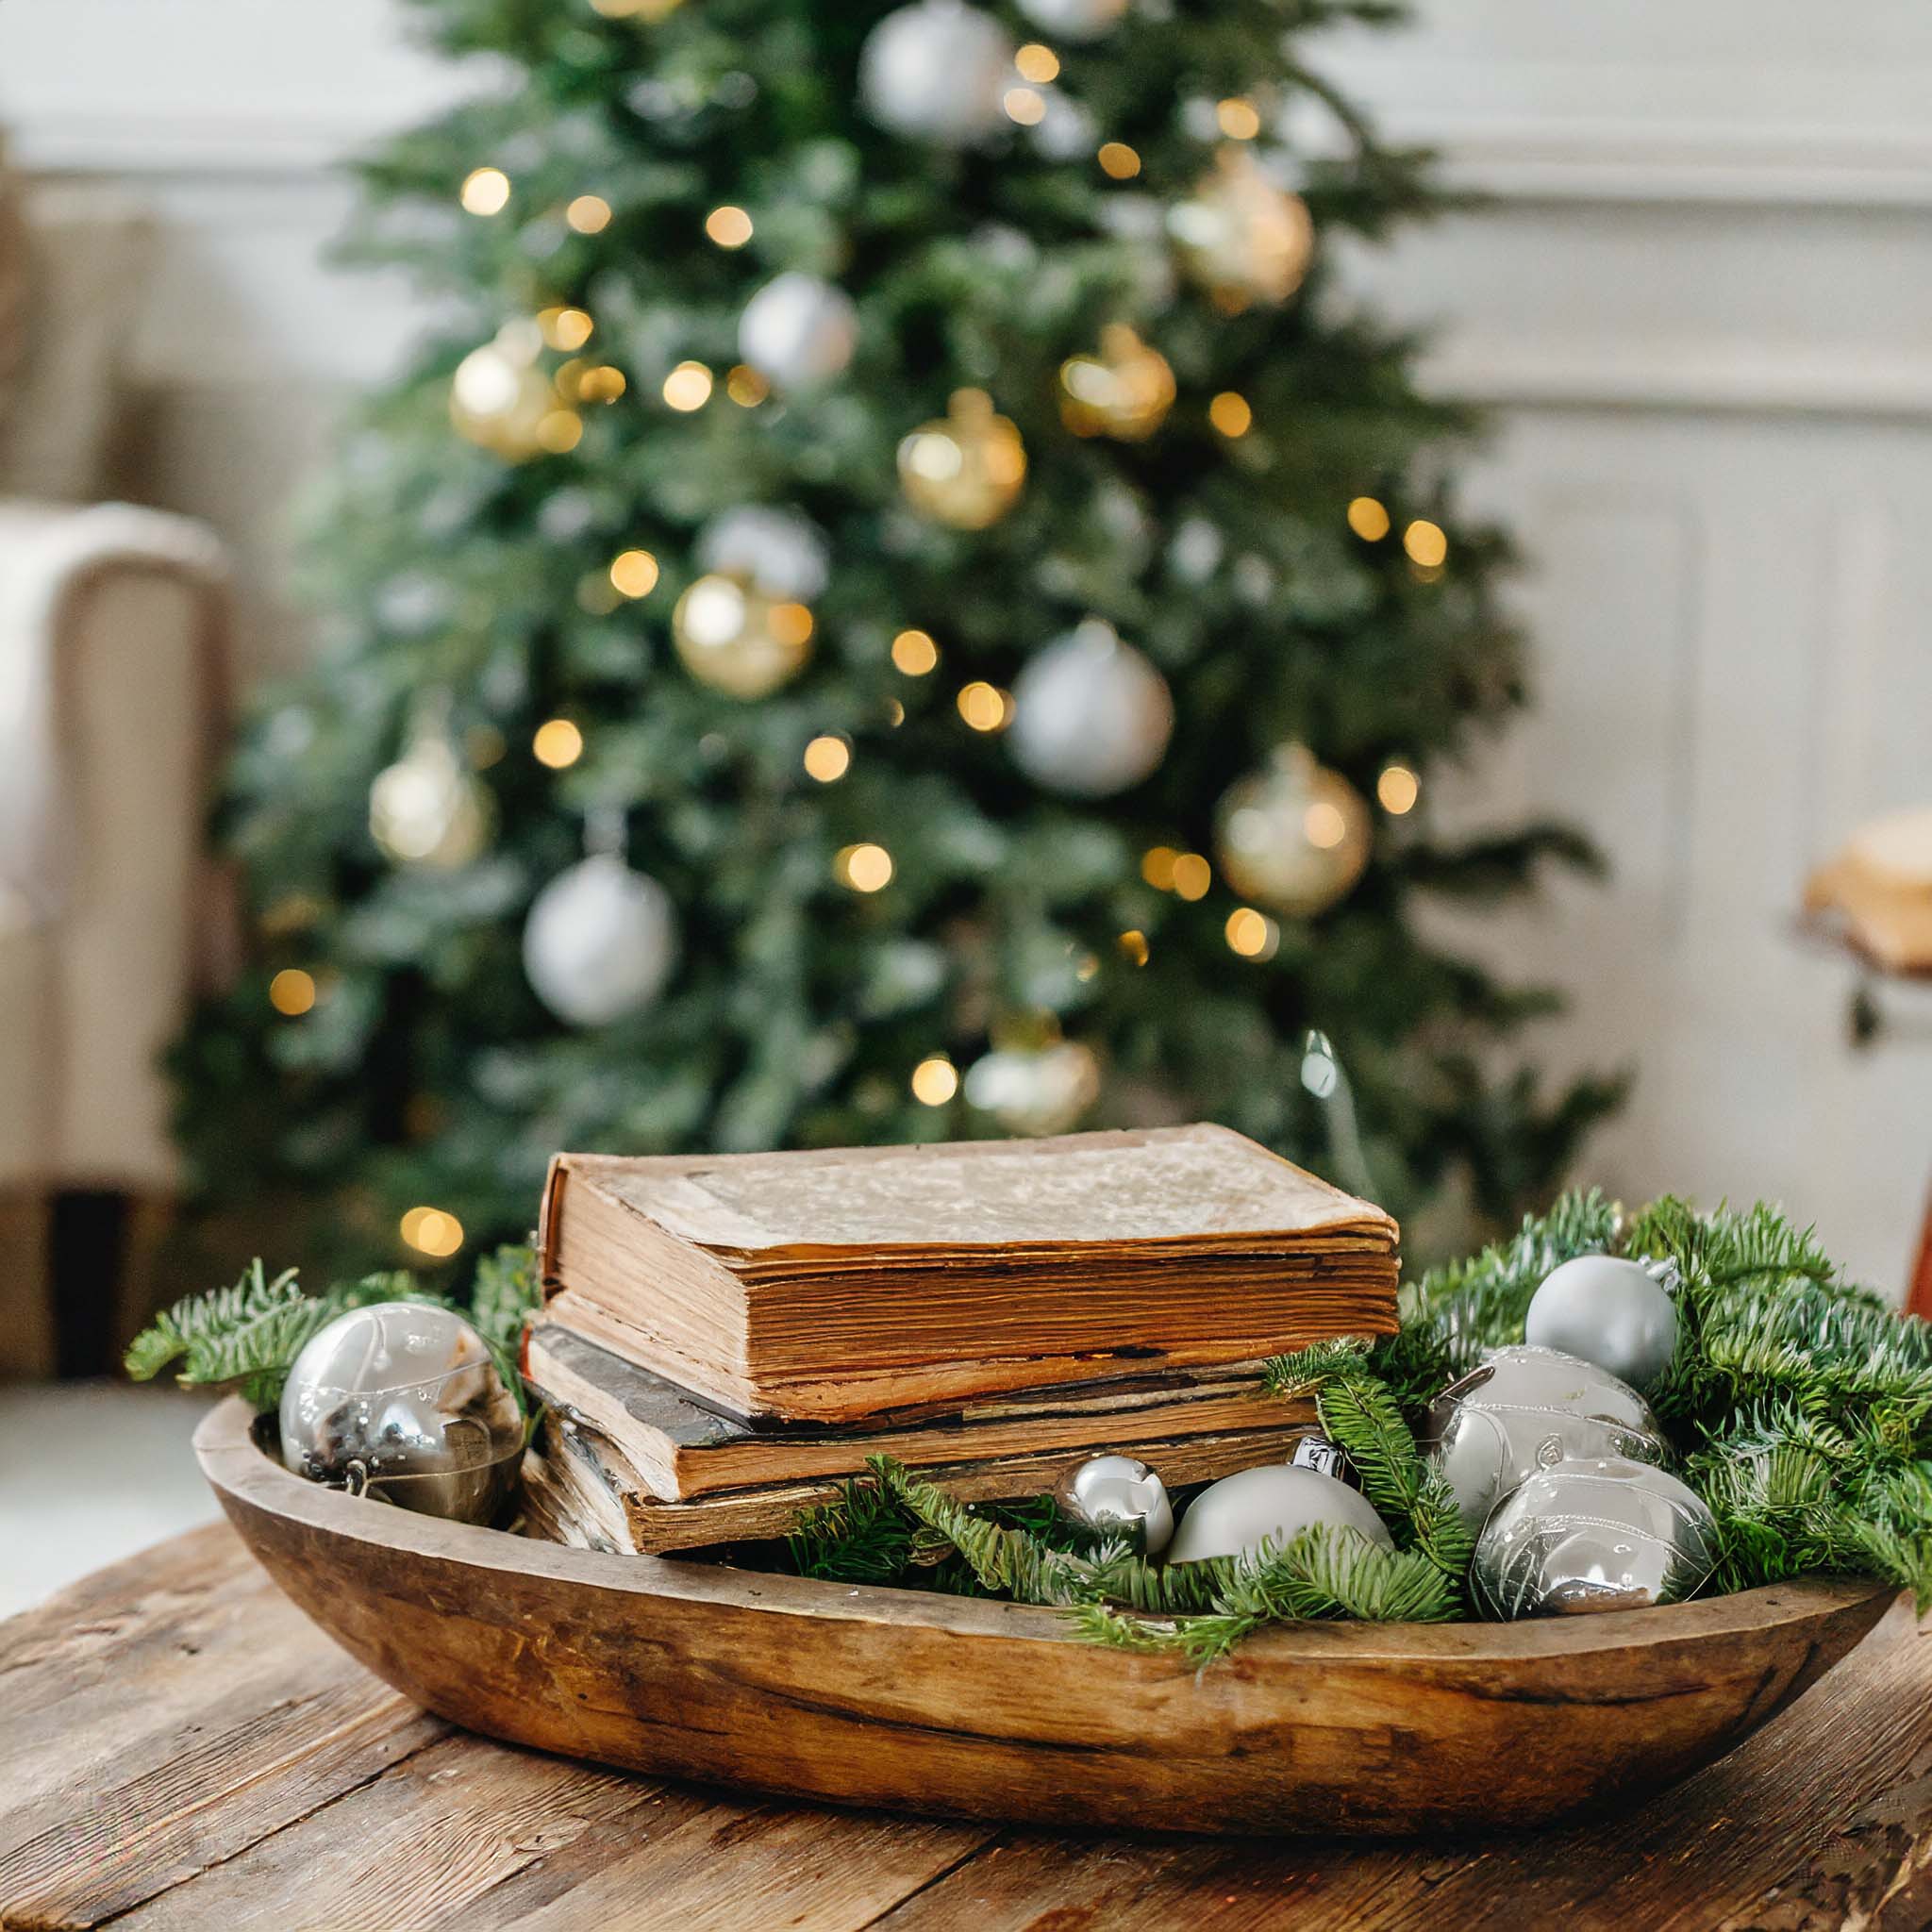 Wooden dough bowl filled with vintage books, greenery, and vintage Christmas ornaments.